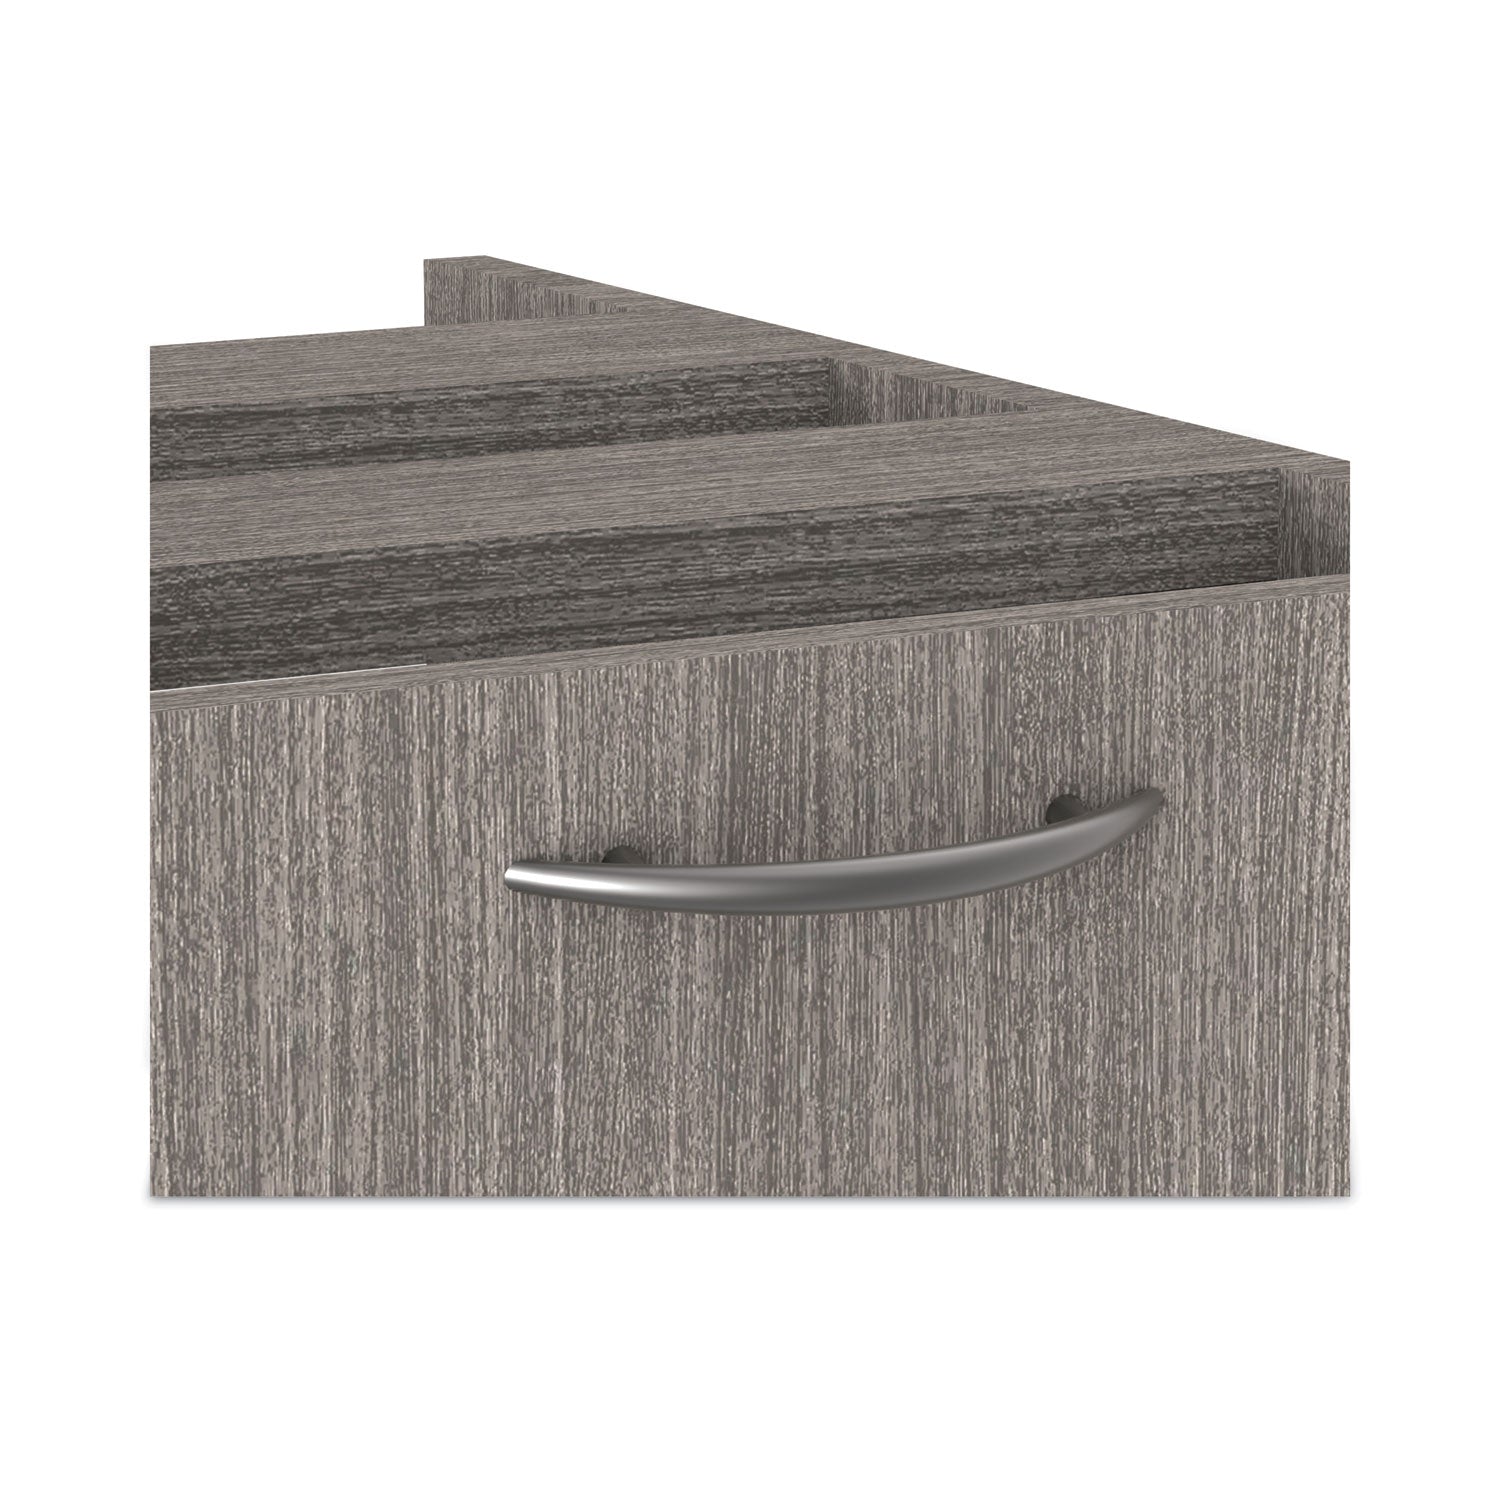 alera-valencia-series-full-pedestal-file-left-or-right-2-legal-letter-size-file-drawers-gray-1563-x-205-x-285_aleva542822gy - 4